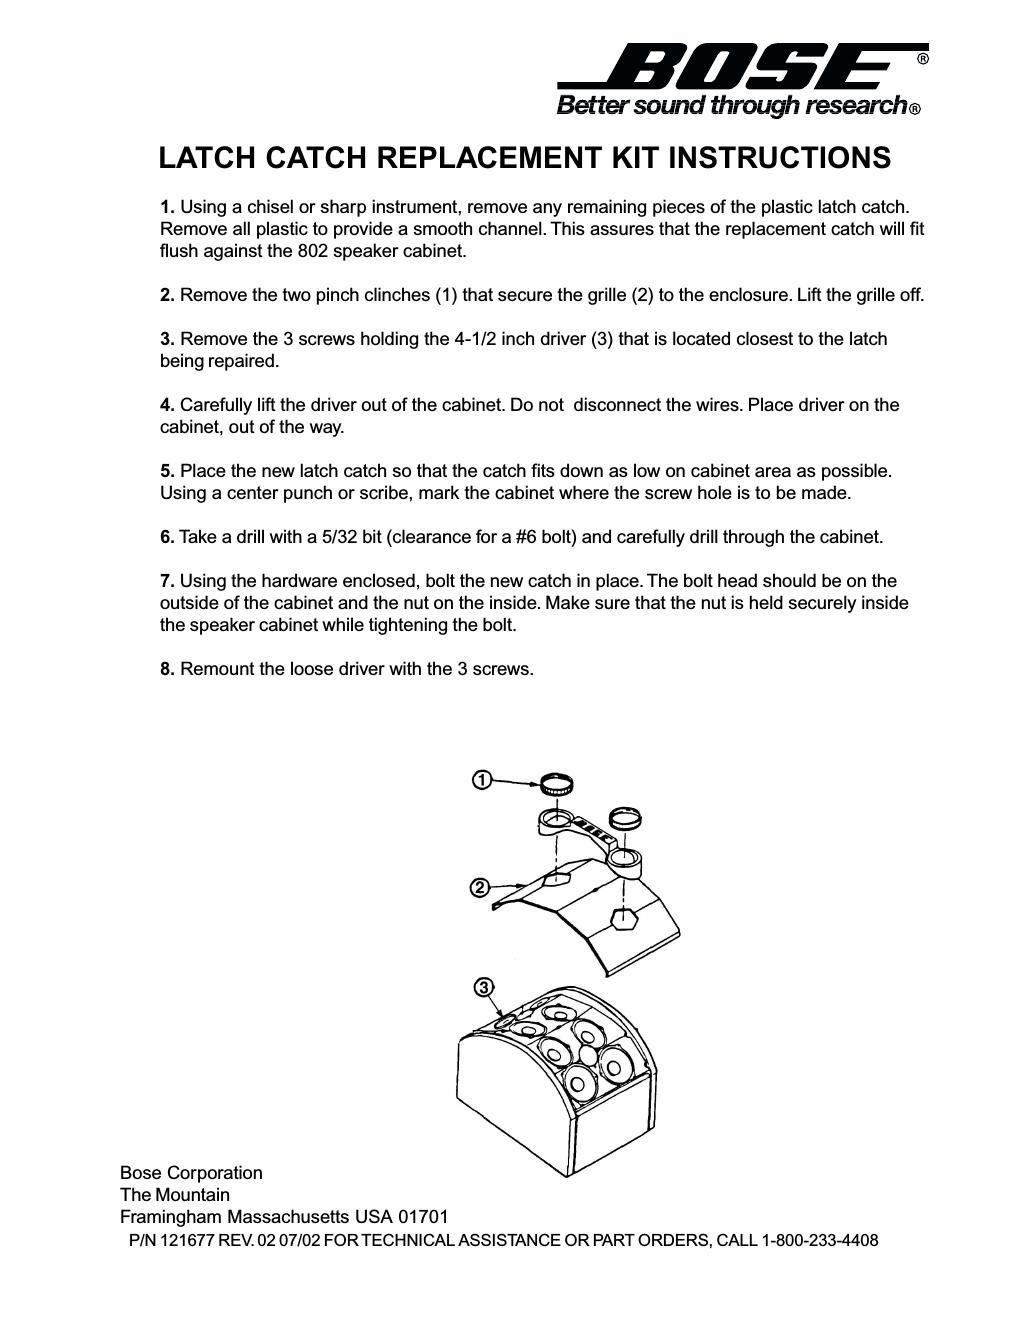 bose latch catch replacement kit instructions